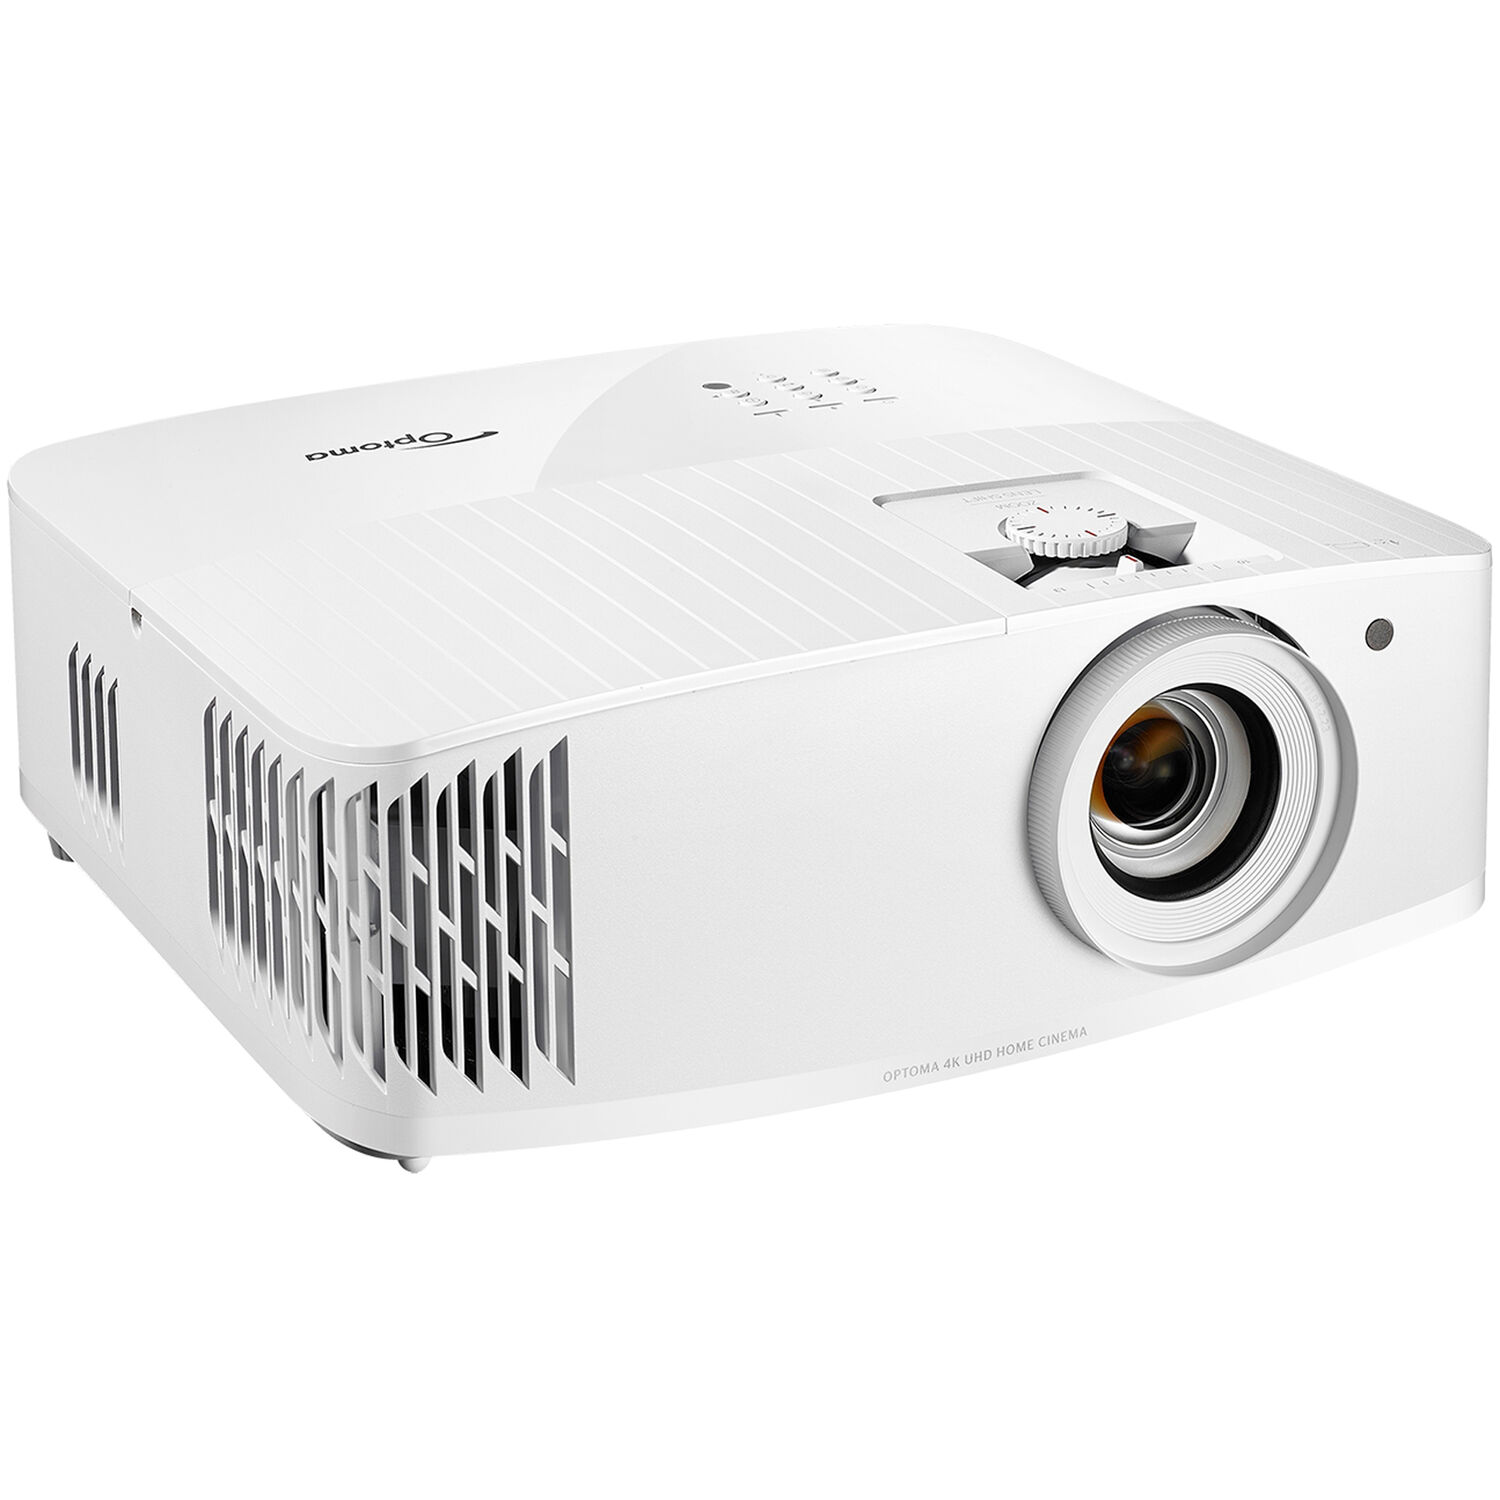 Proyector para Home Theater Dlp Xpr 4K Uhd Optoma Technology Uhd55 3600 Lumens